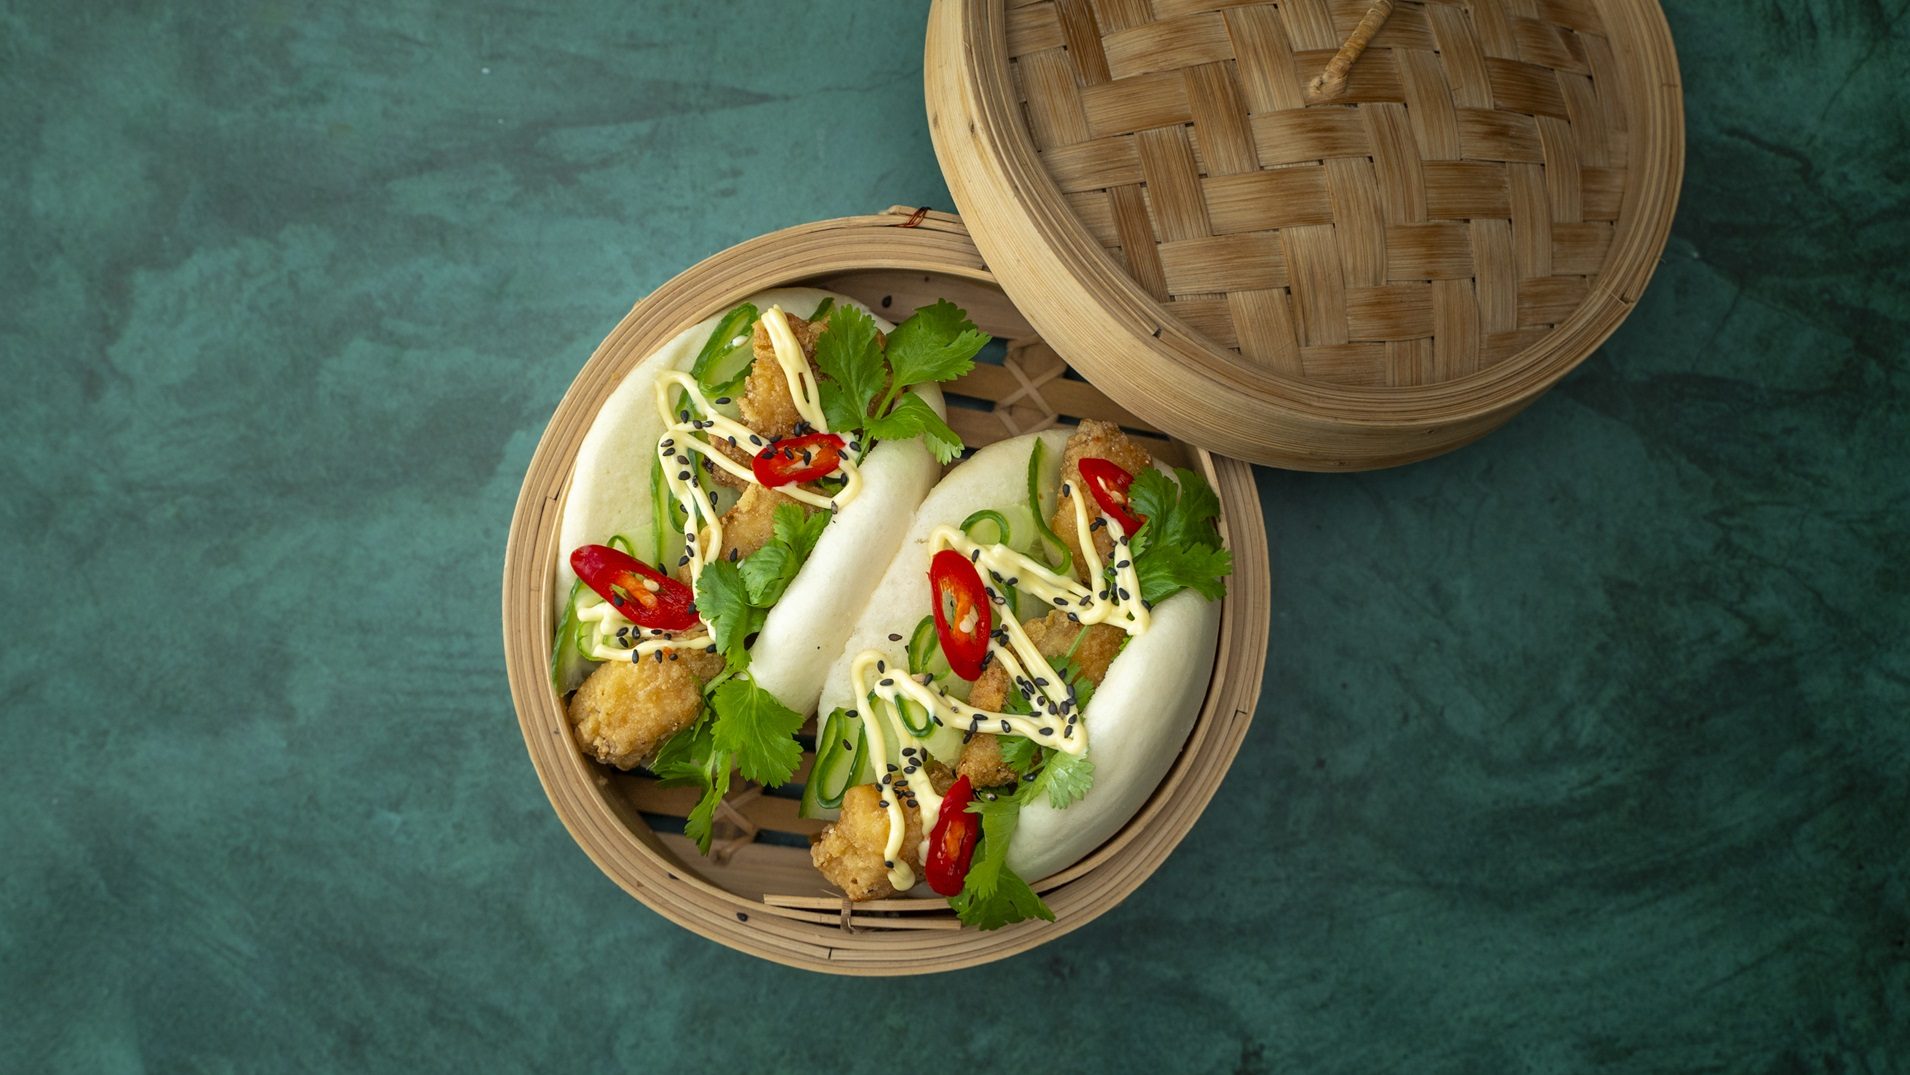 Two filled bao buns inside bamboo steam basket with the lid next to it.